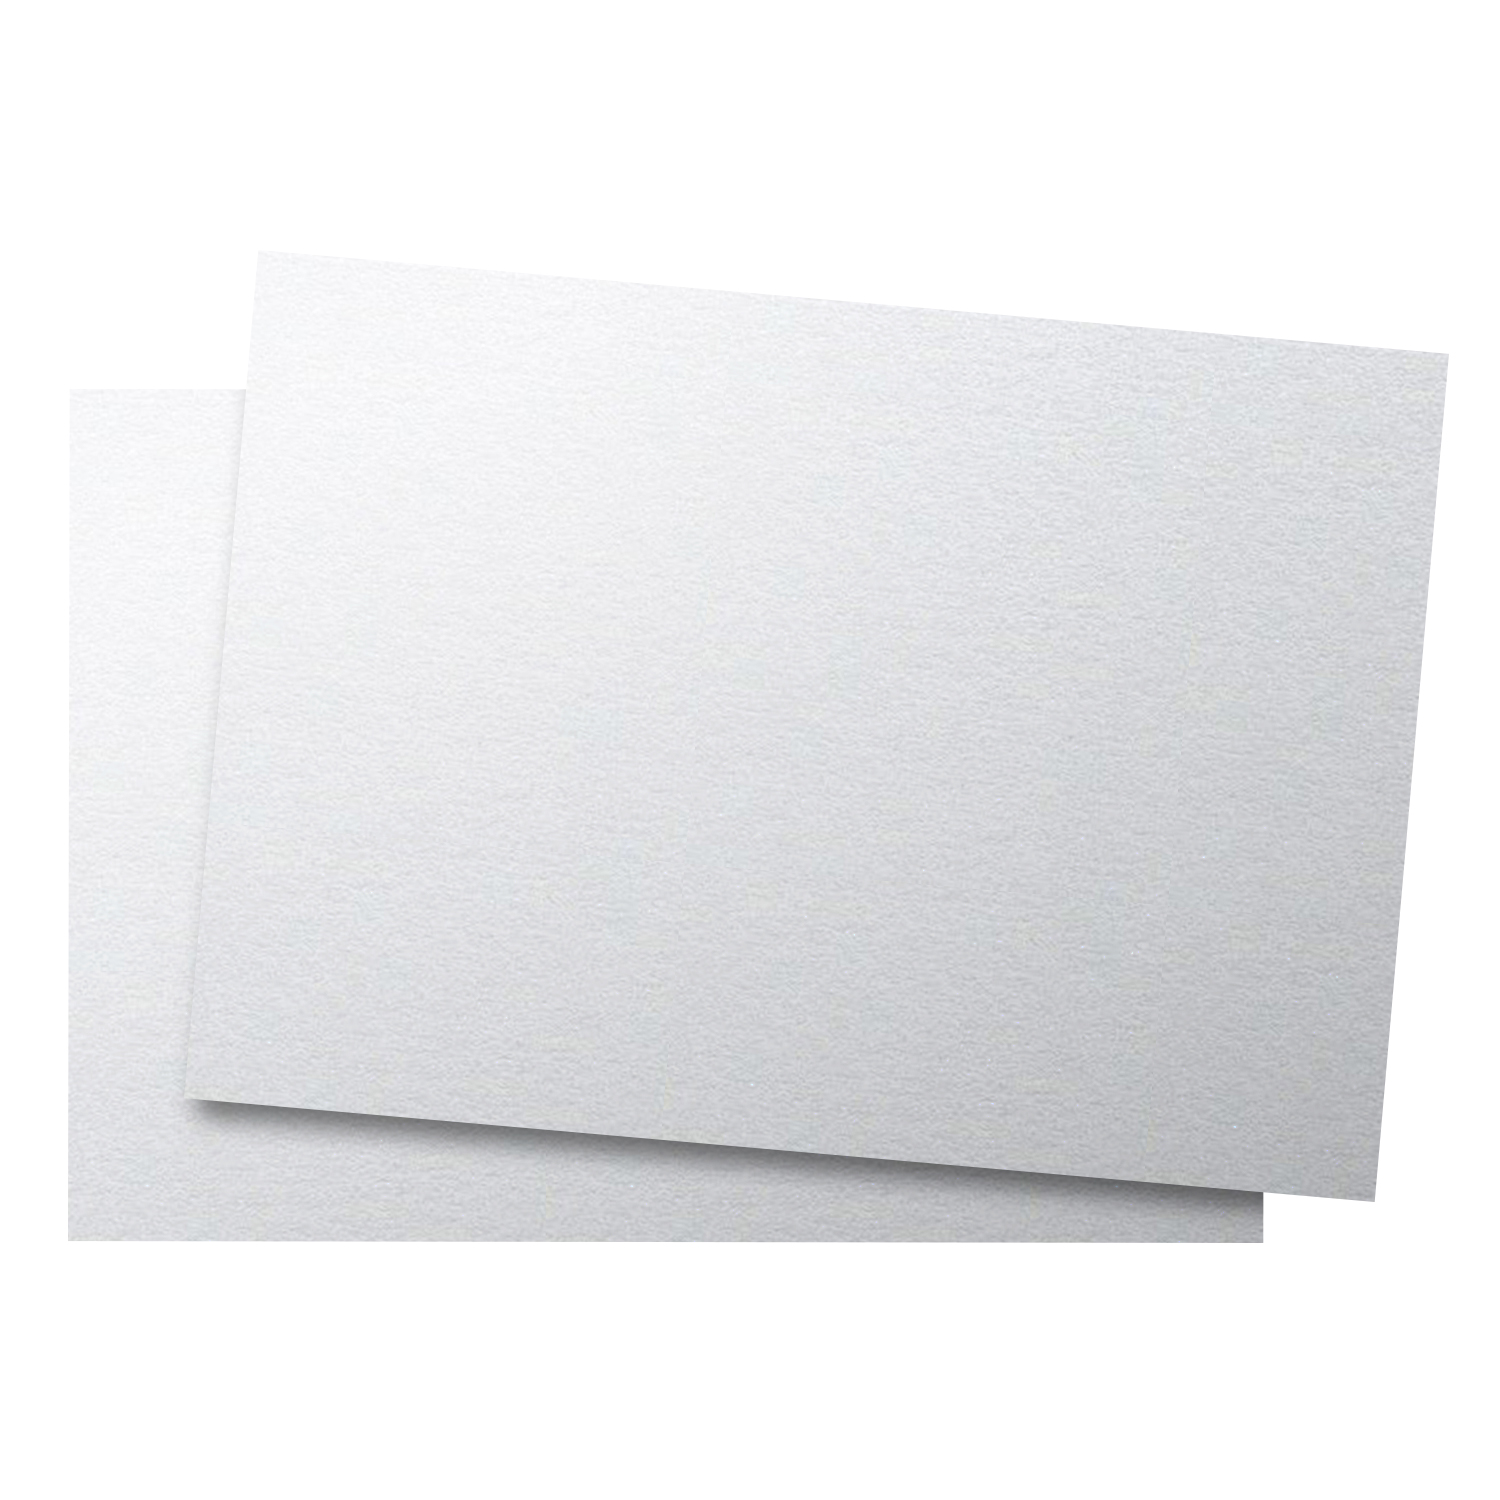  Black Gold and White 8.5 x 11 Color Thick Card Stock Paper  Sheets Bulk Set, Make Your Own Art & Crafts Greetings & Invitations, Gift  Tags